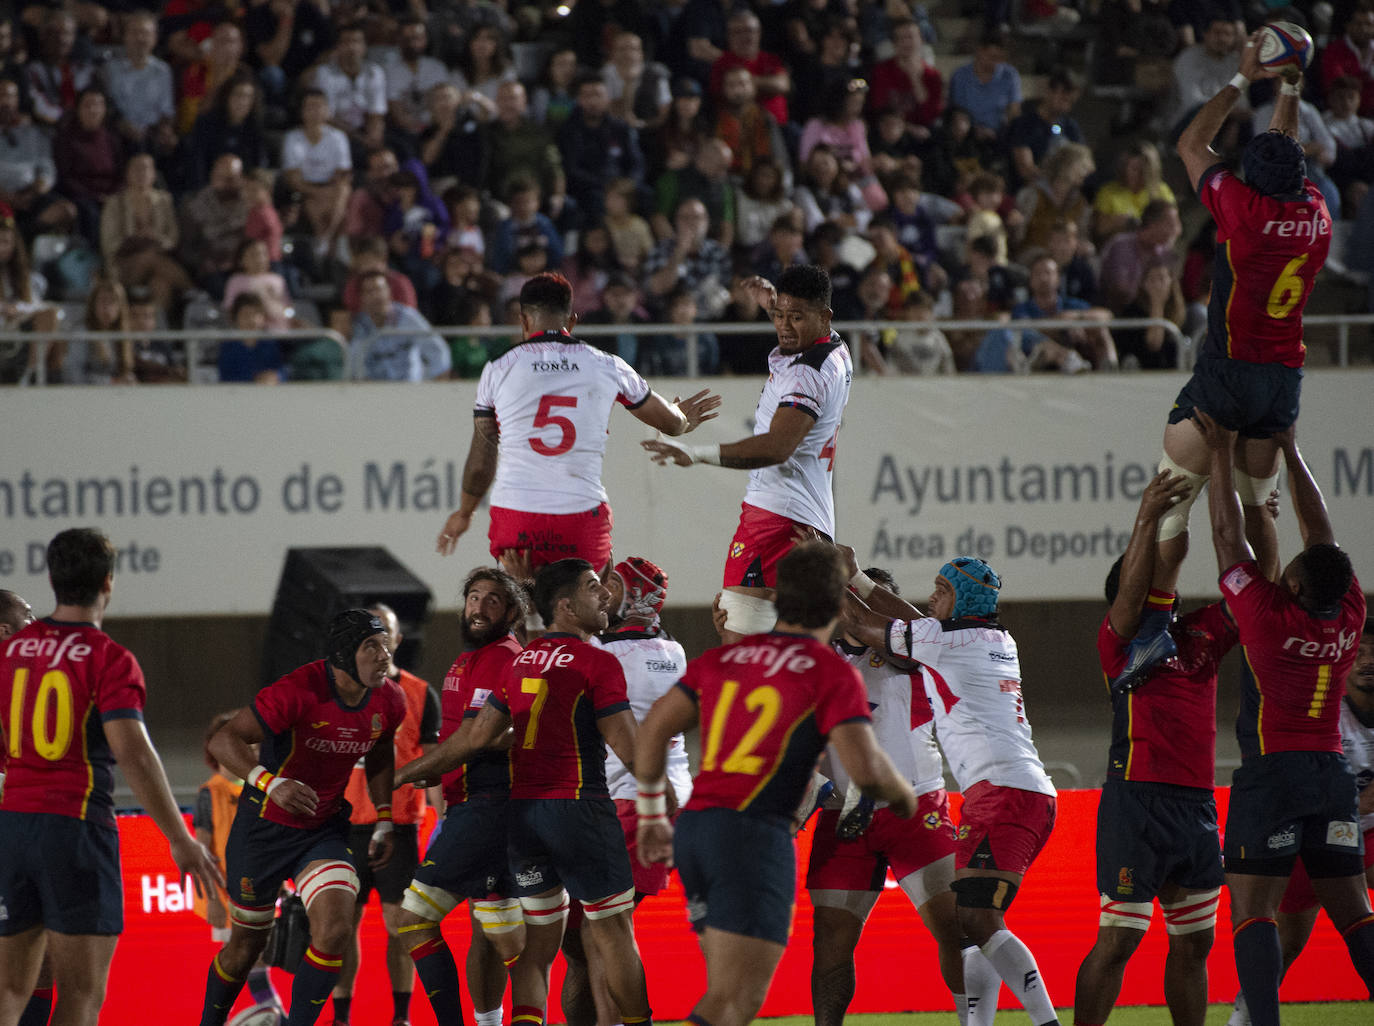 Spain suffer massive defeat to Tonga in rugby test match